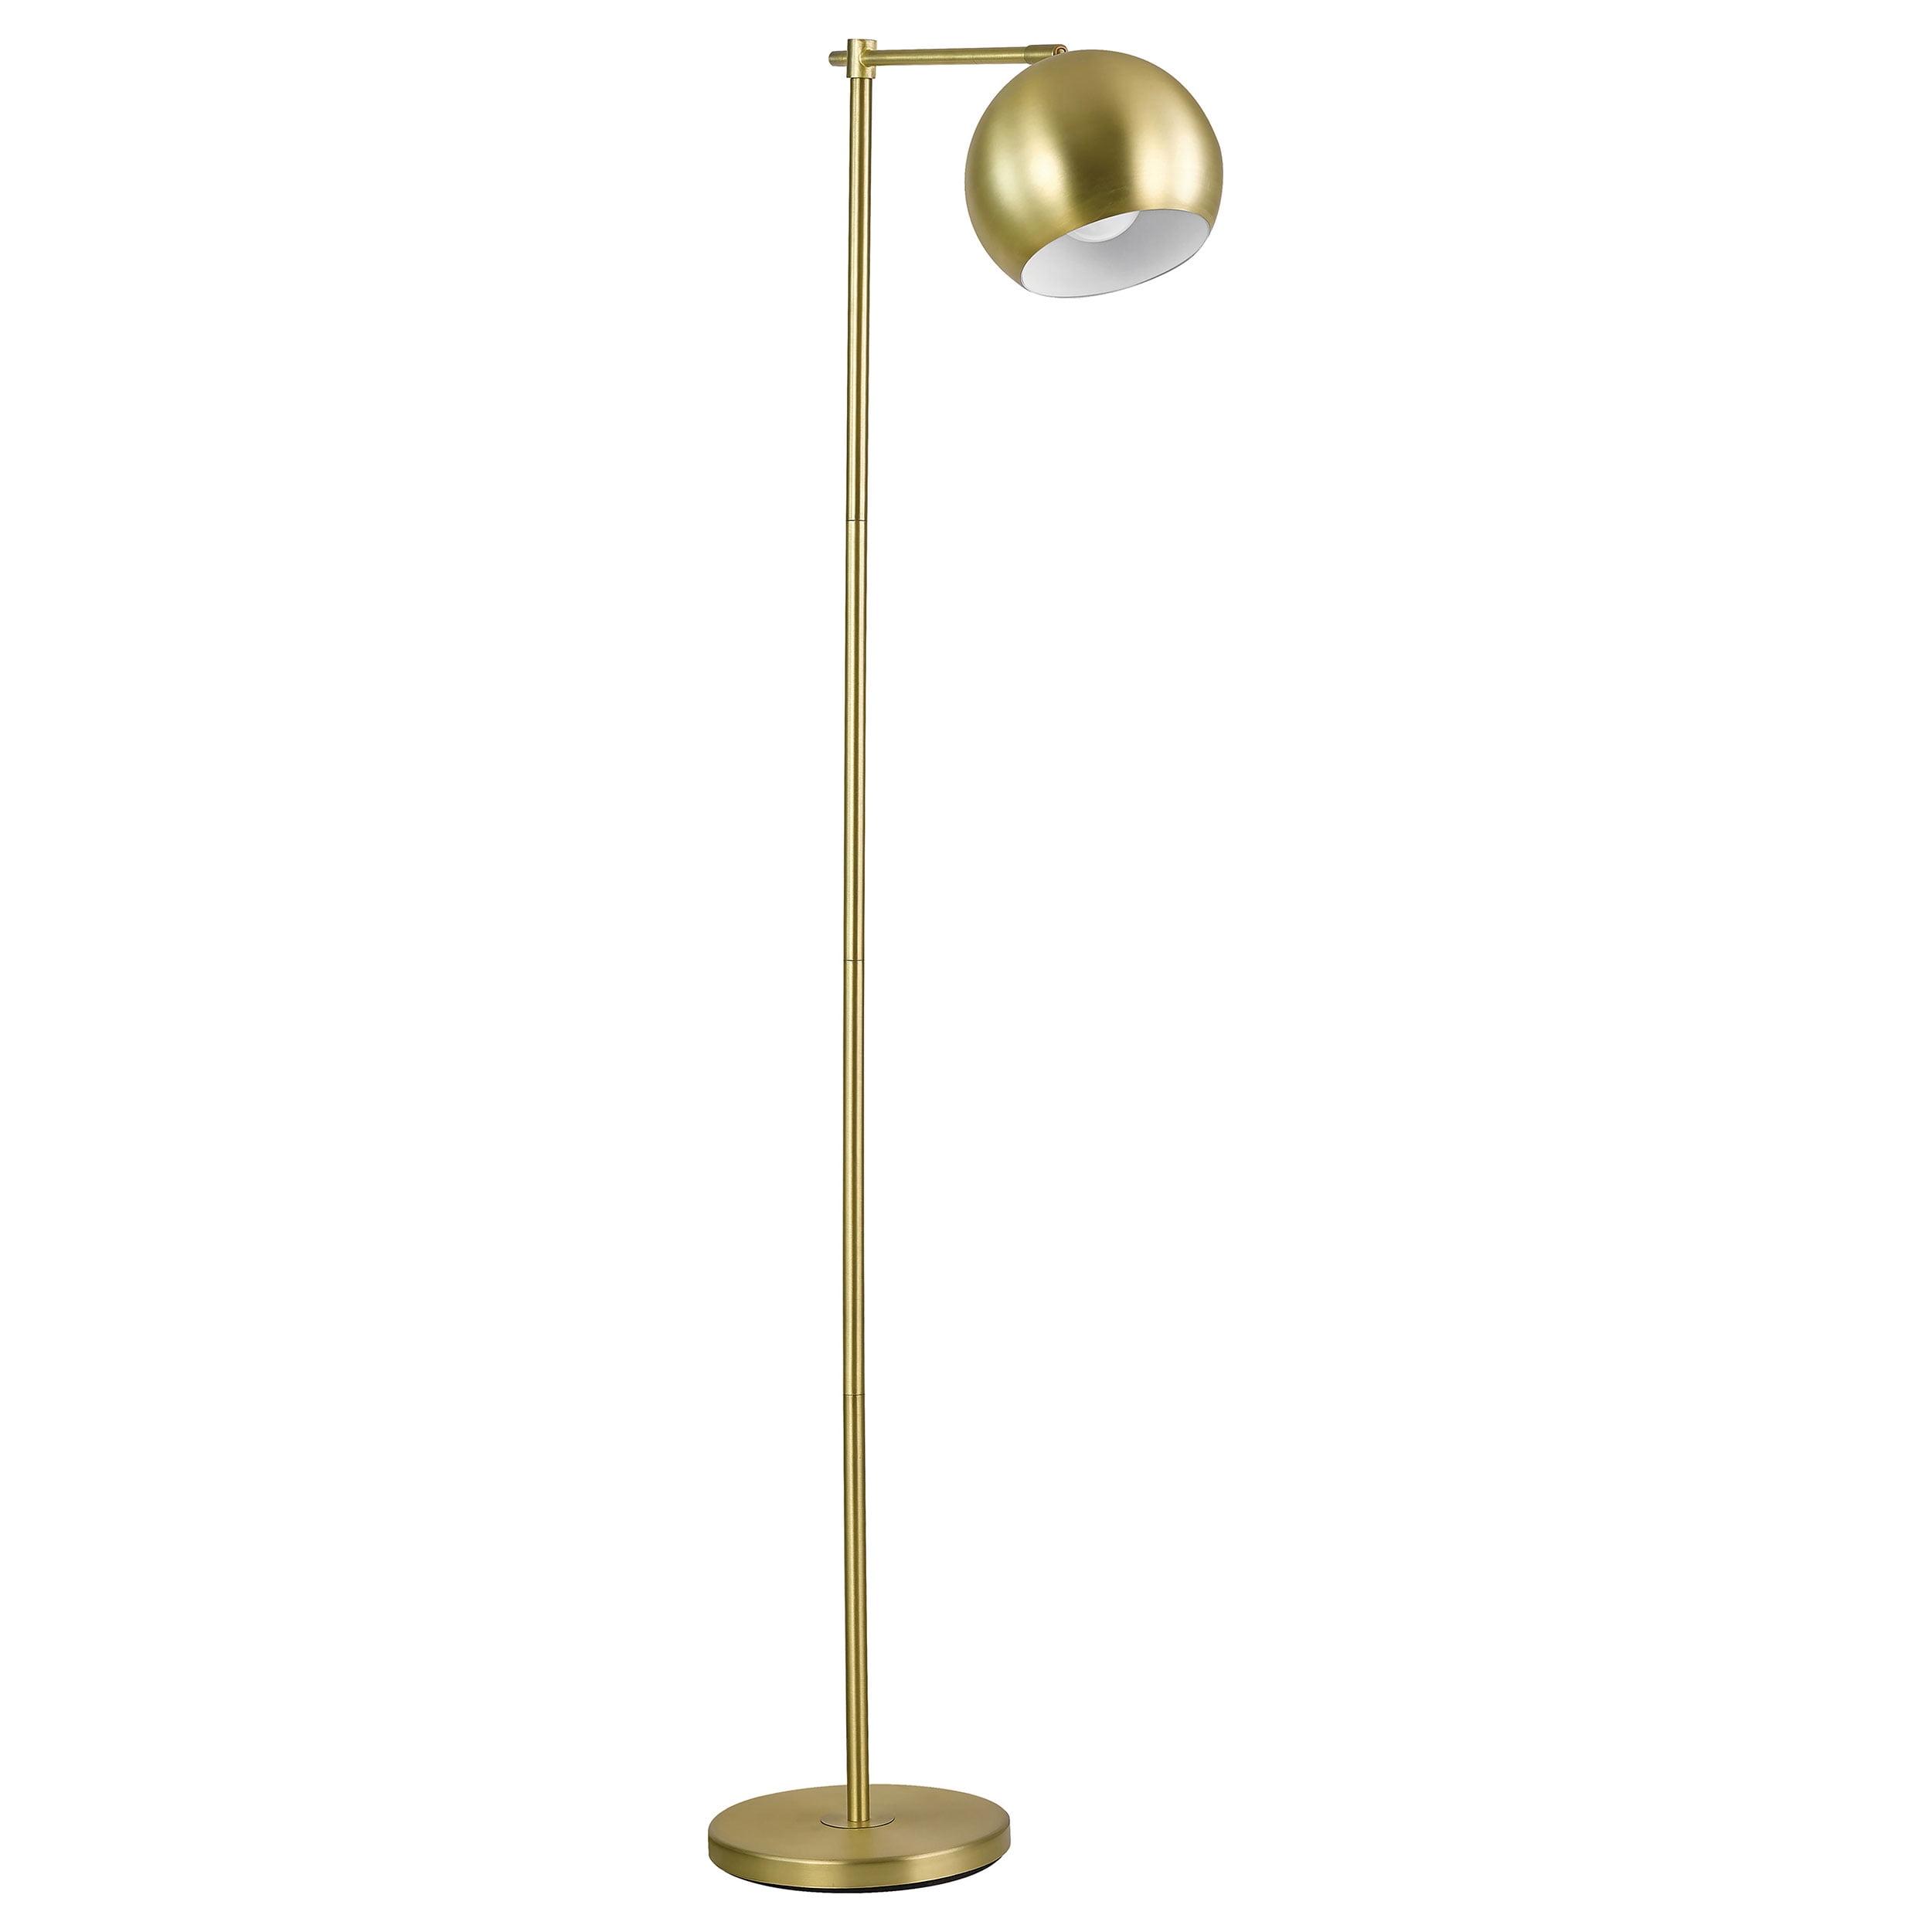 Sleek Transitional Brass Floor Lamp with Rounded Shade